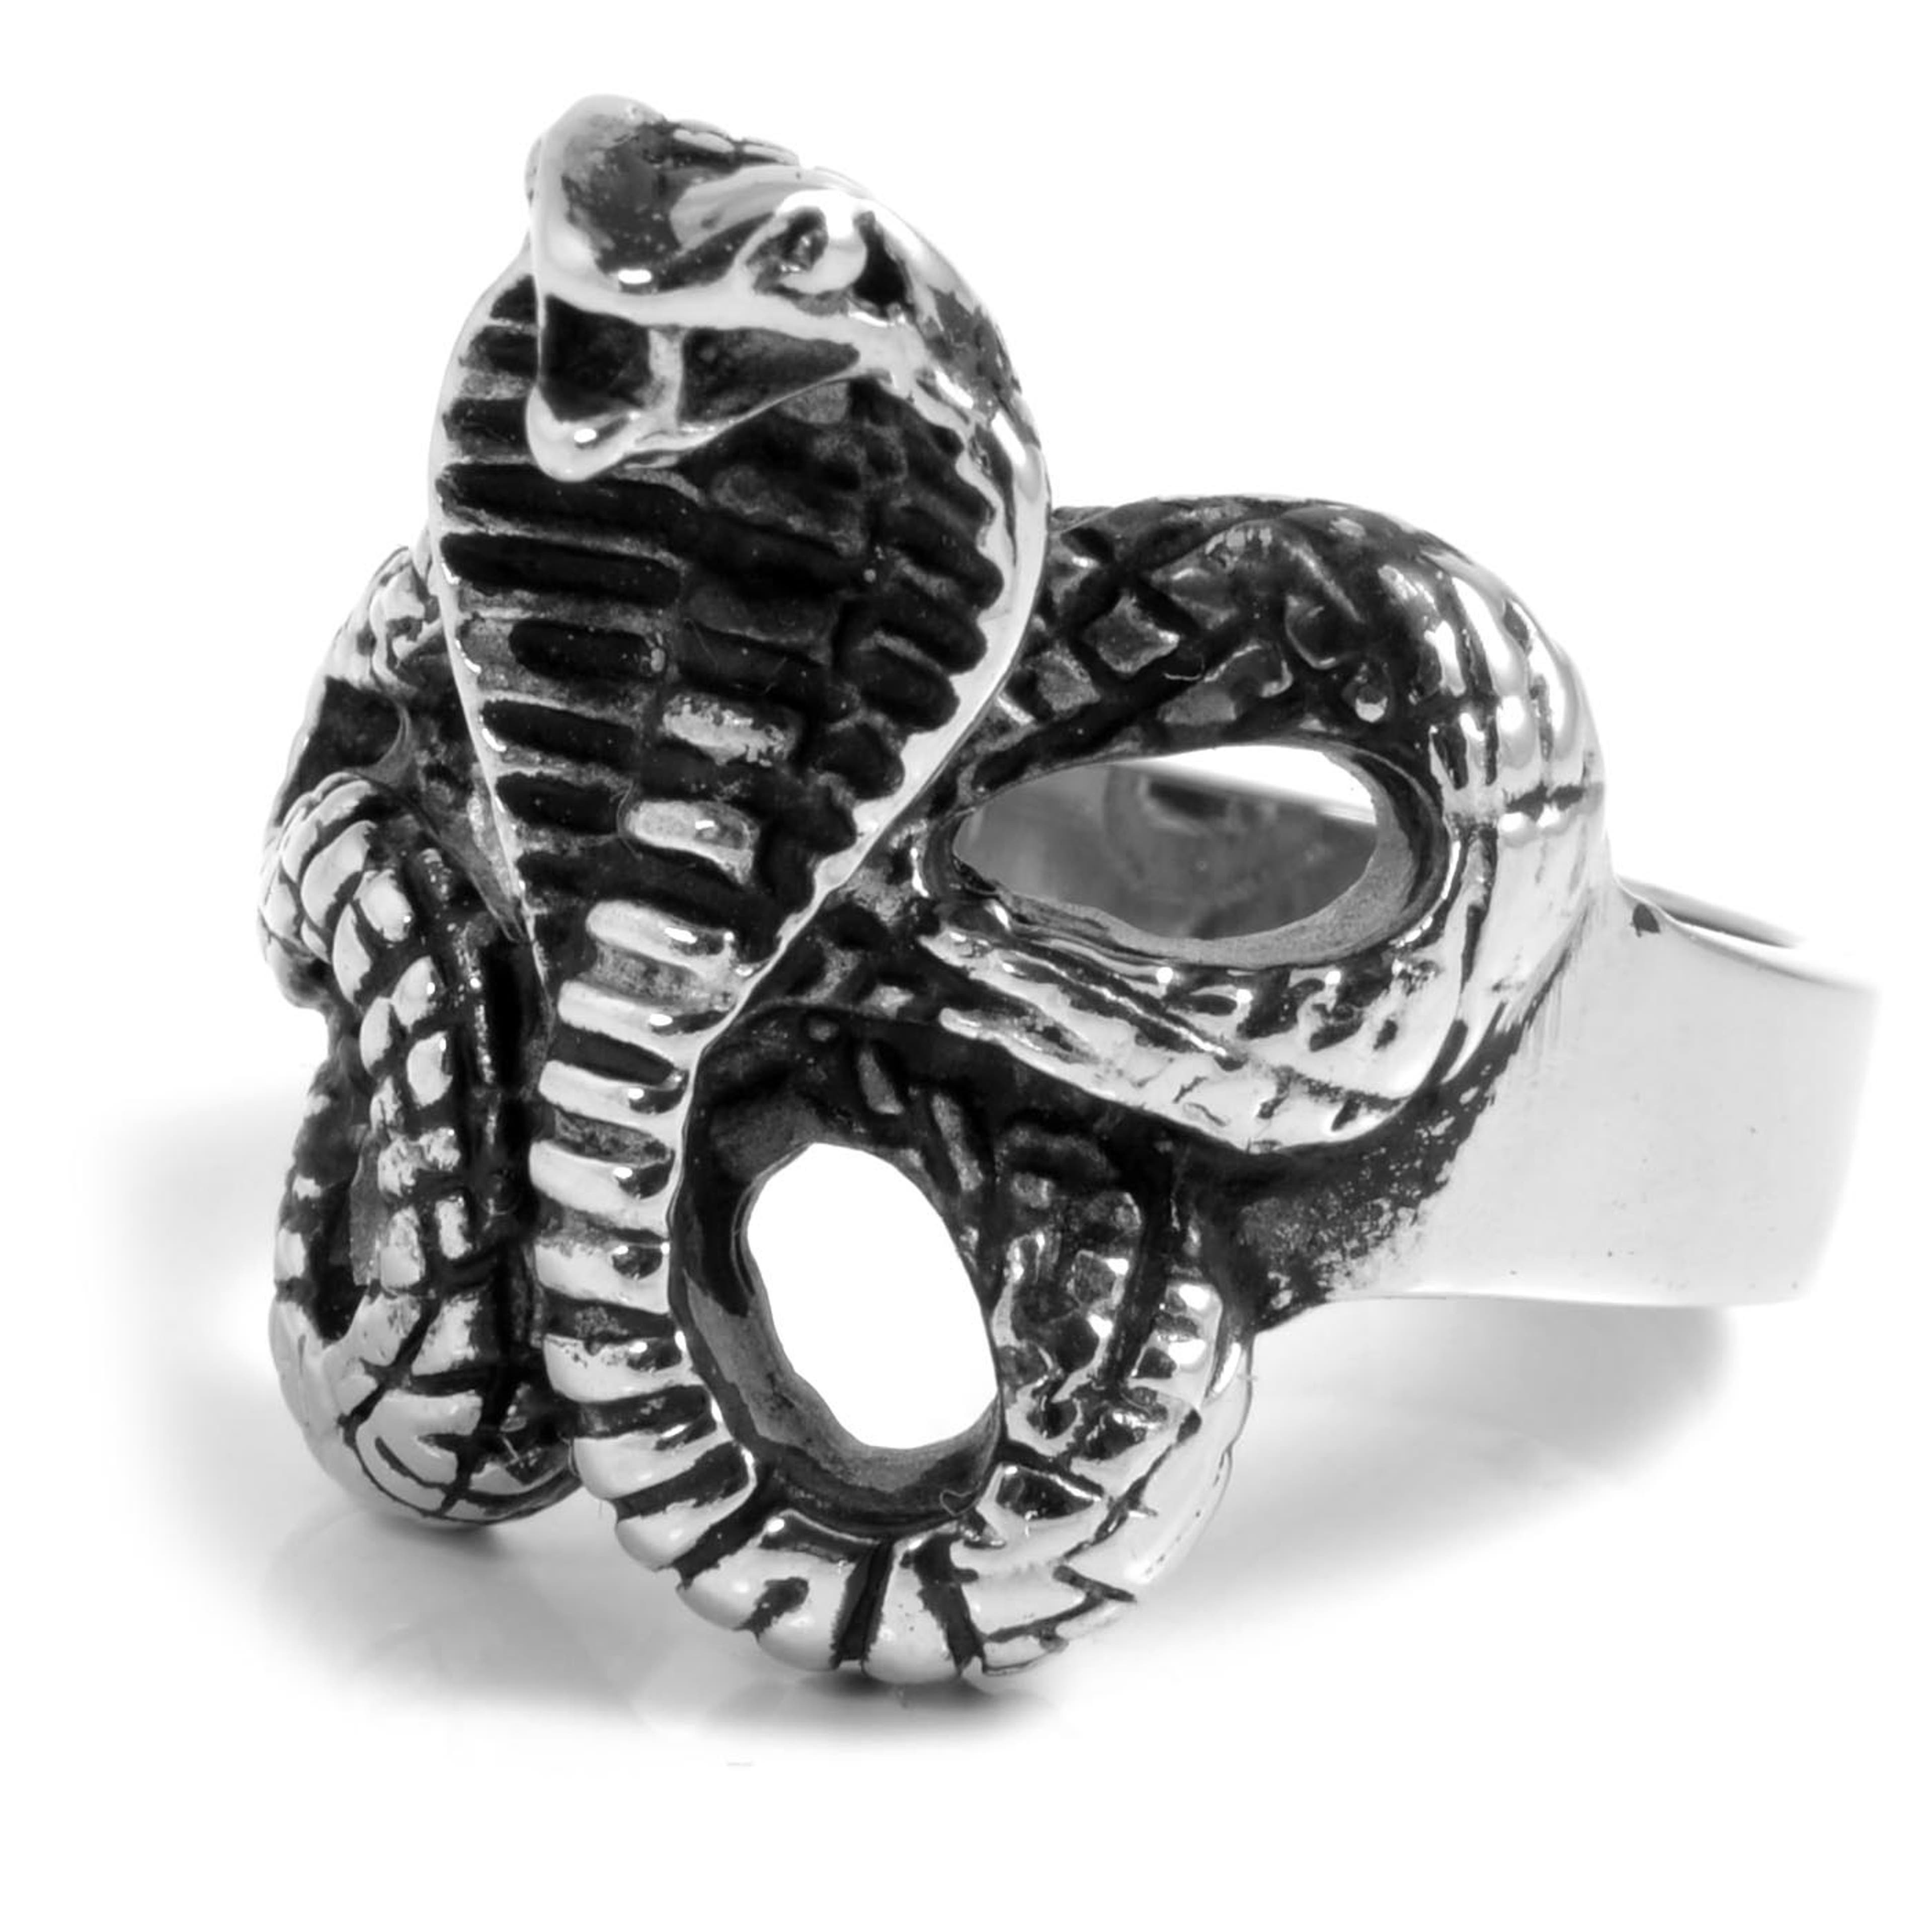 Silver-Tone & Black Stainless Steel Coiled Cobra Ring